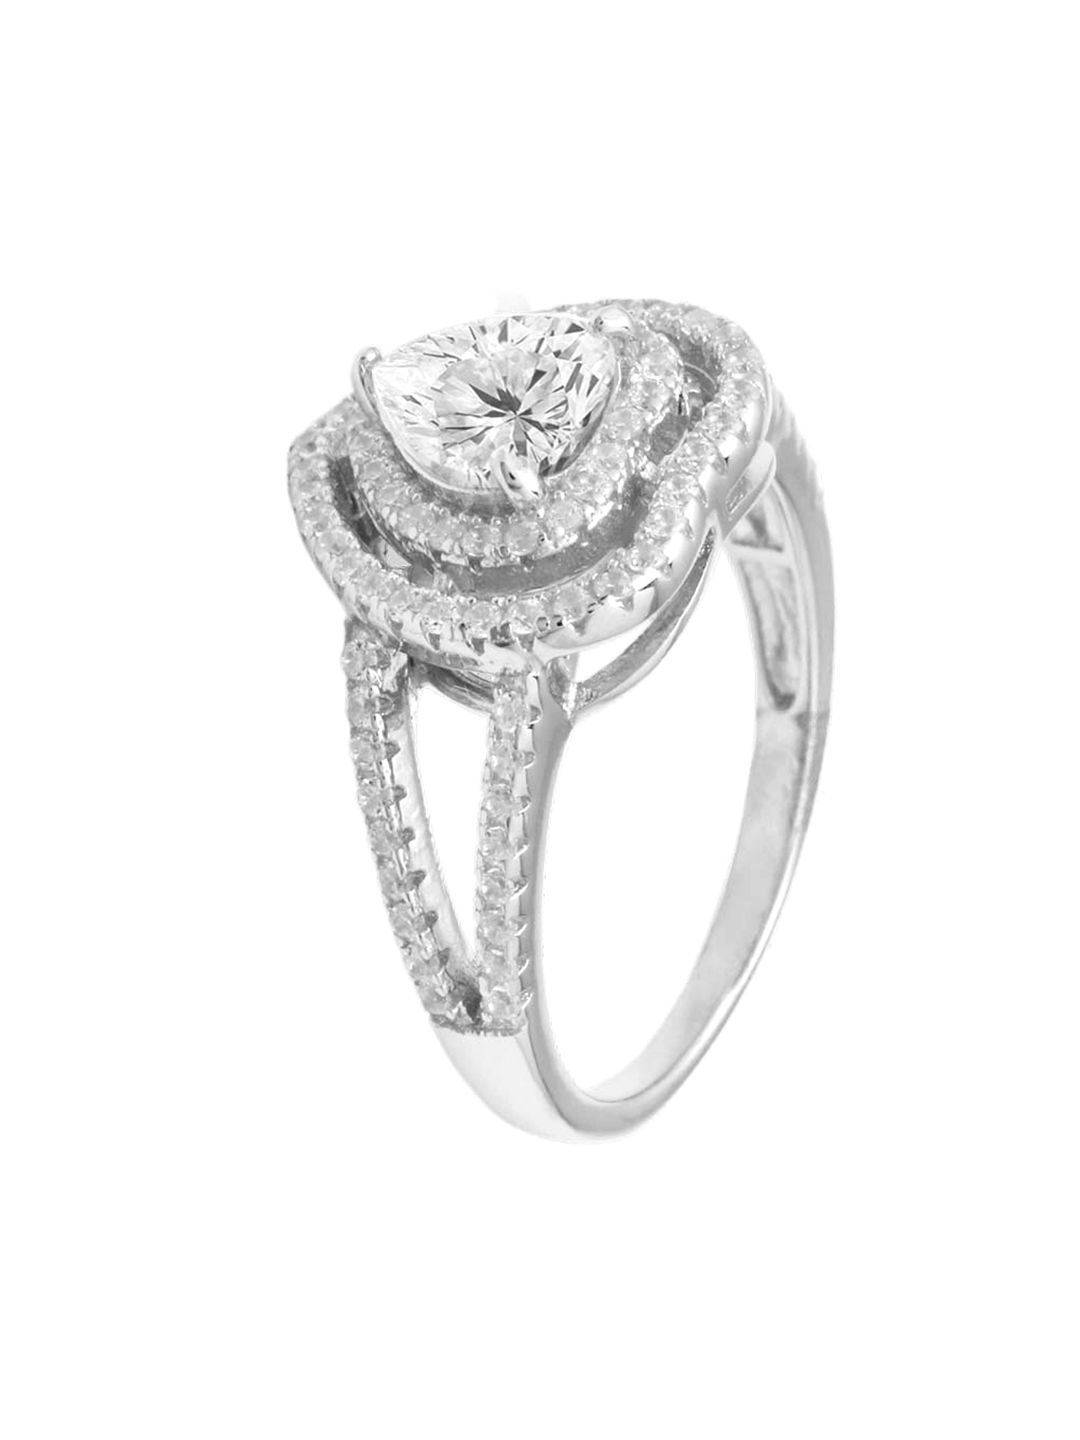 ANAYRA Women White & Silver-Toned 925 Sterling Silver Ring Price in India